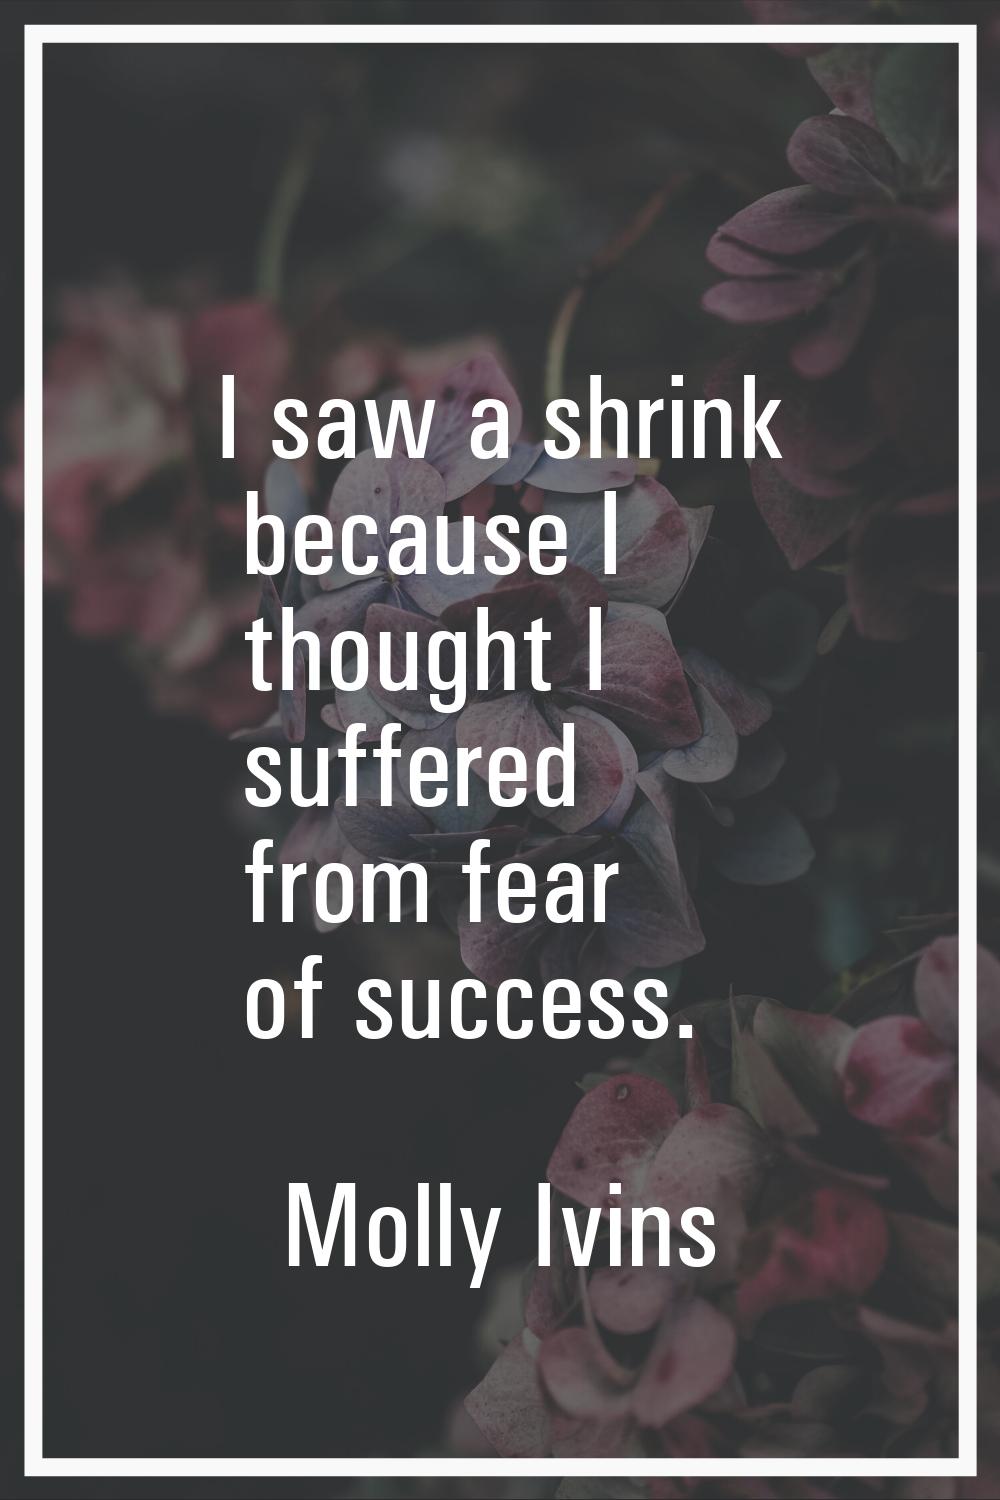 I saw a shrink because I thought I suffered from fear of success.